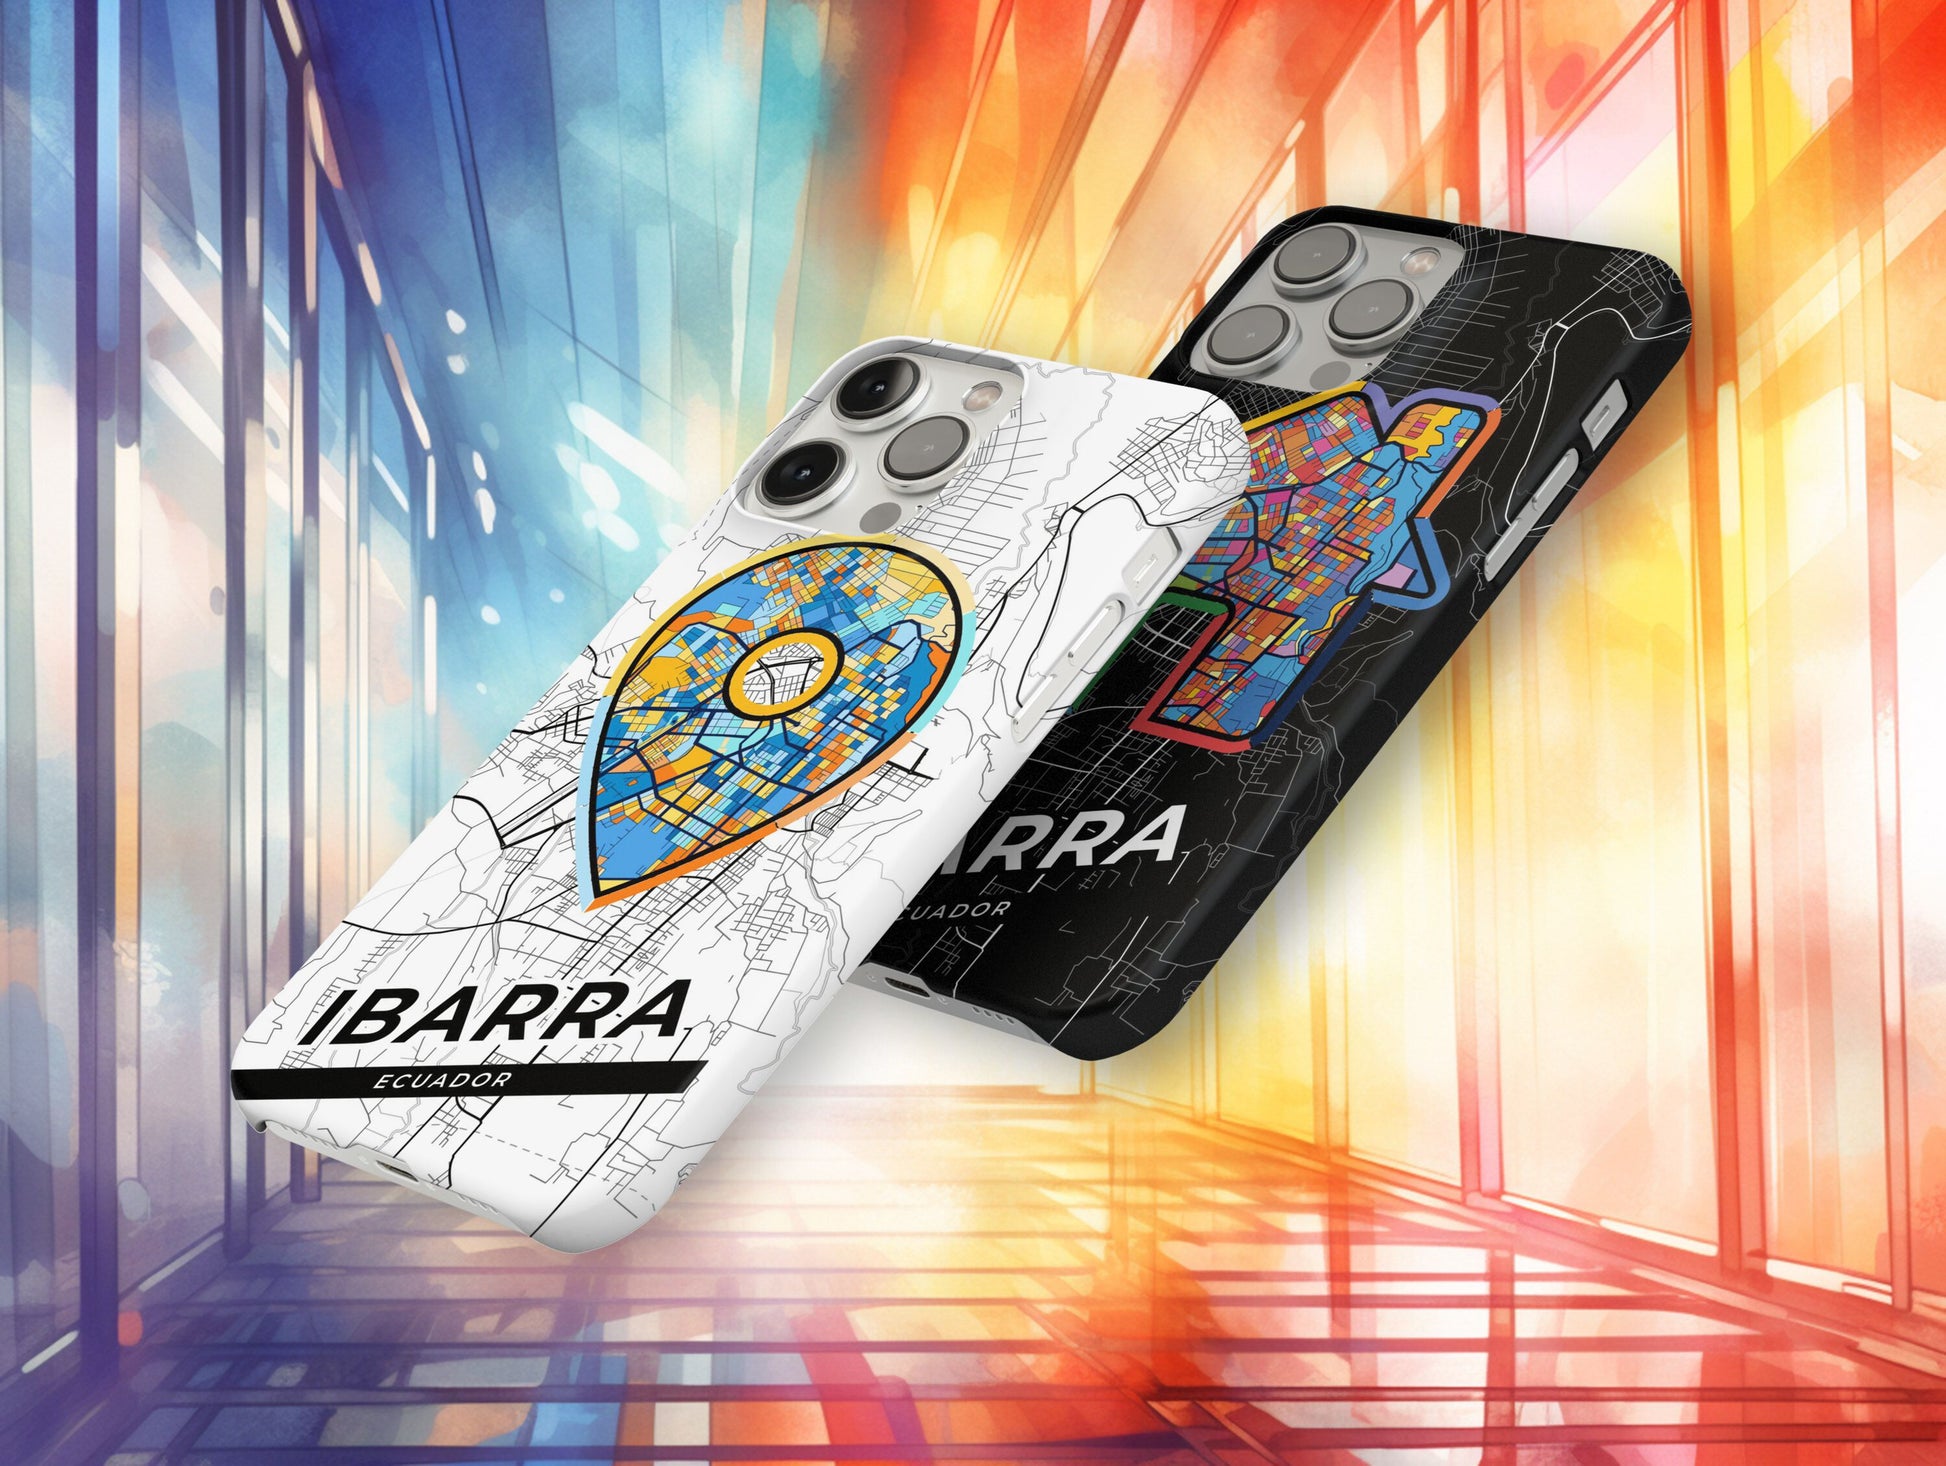 Ibarra Ecuador slim phone case with colorful icon. Birthday, wedding or housewarming gift. Couple match cases.